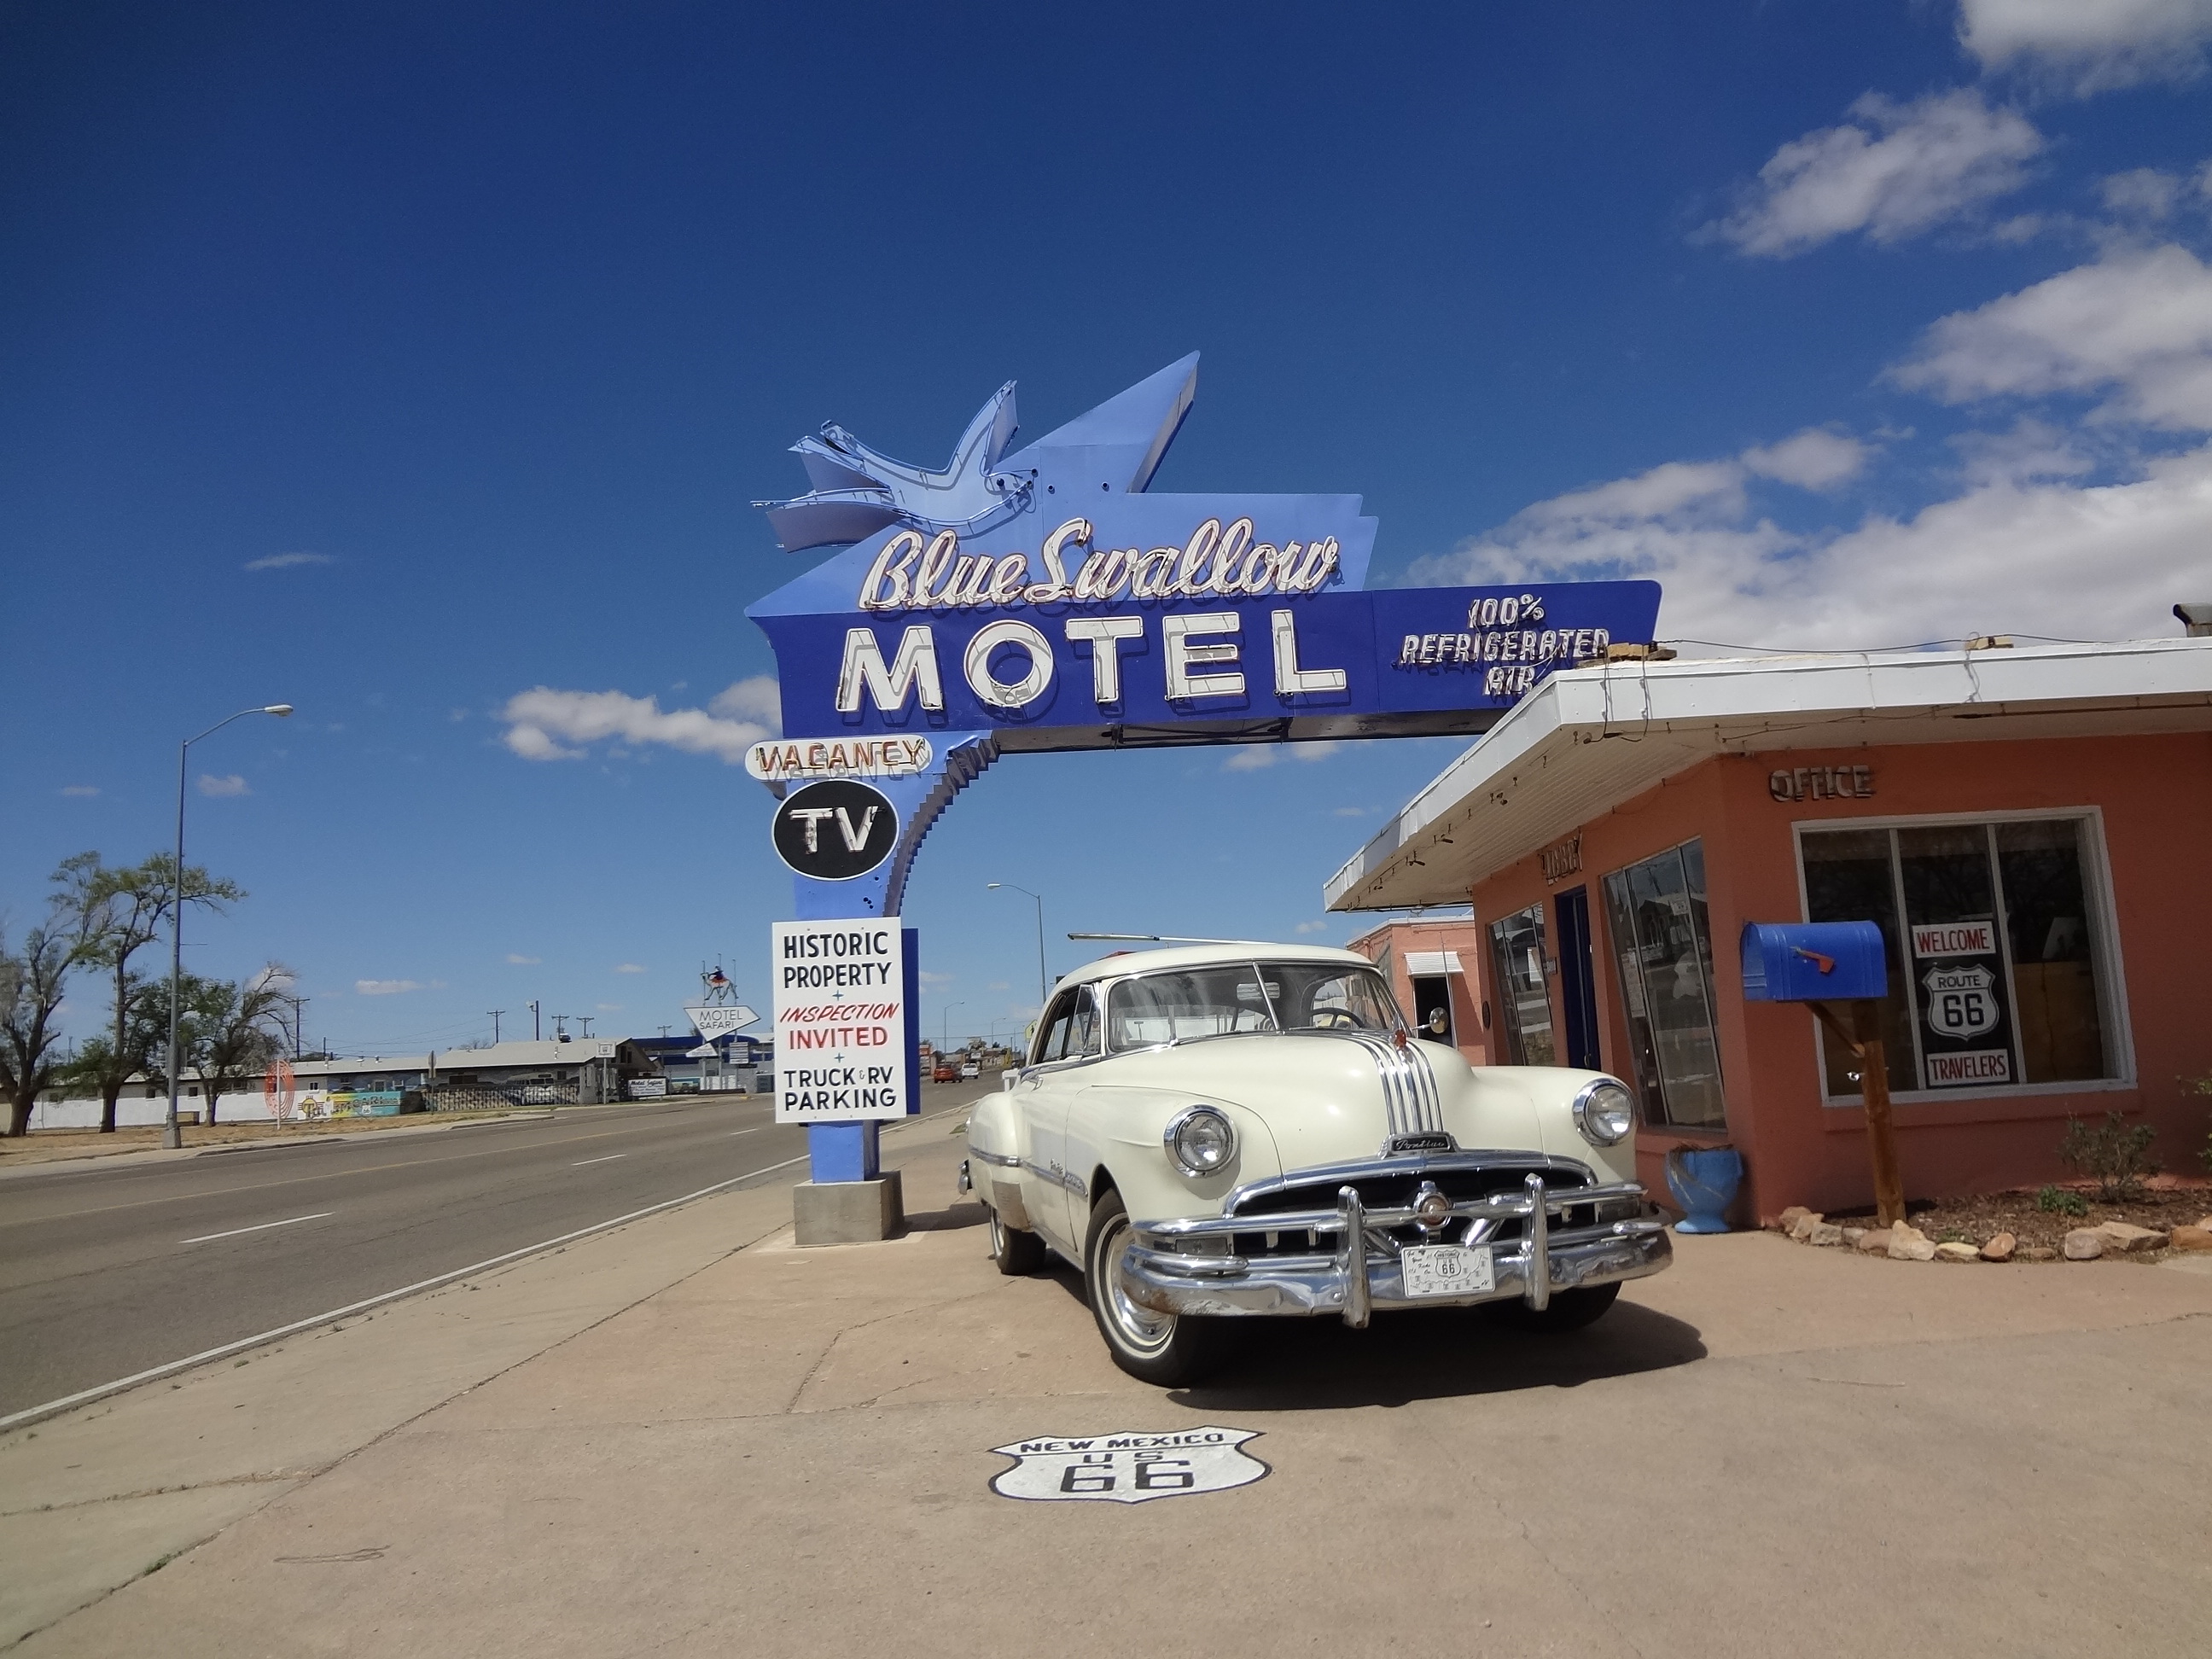 ISSO drove ROUTE66 vol.7 from Budaghers,New Mexico to Albuquerque,New Mexico